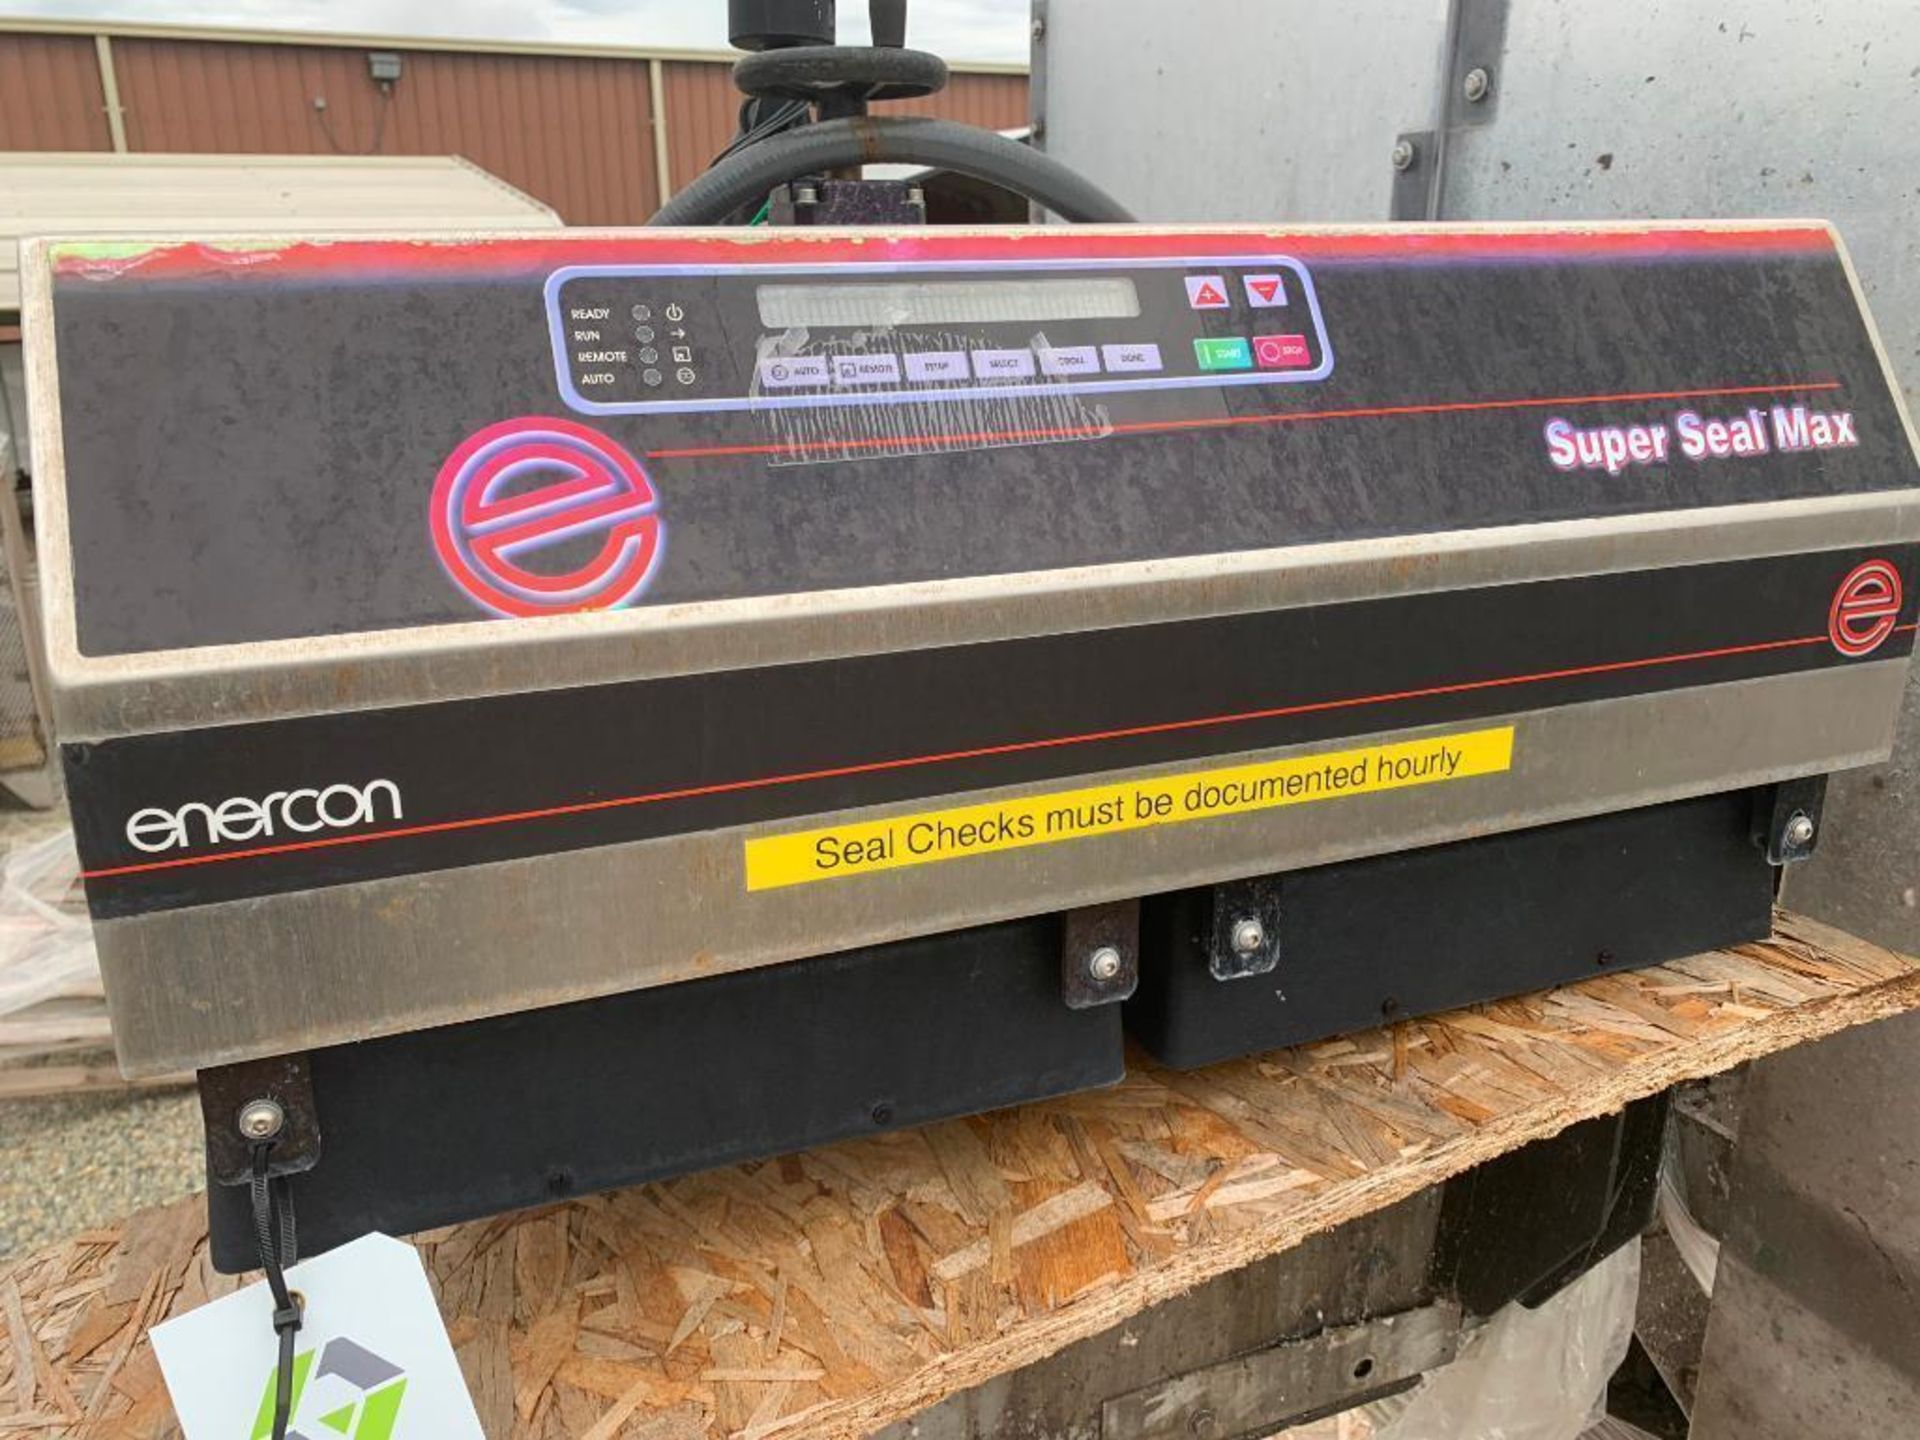 Enercon super seal max induction sealer. (Located in Faison, NC) - Image 6 of 10